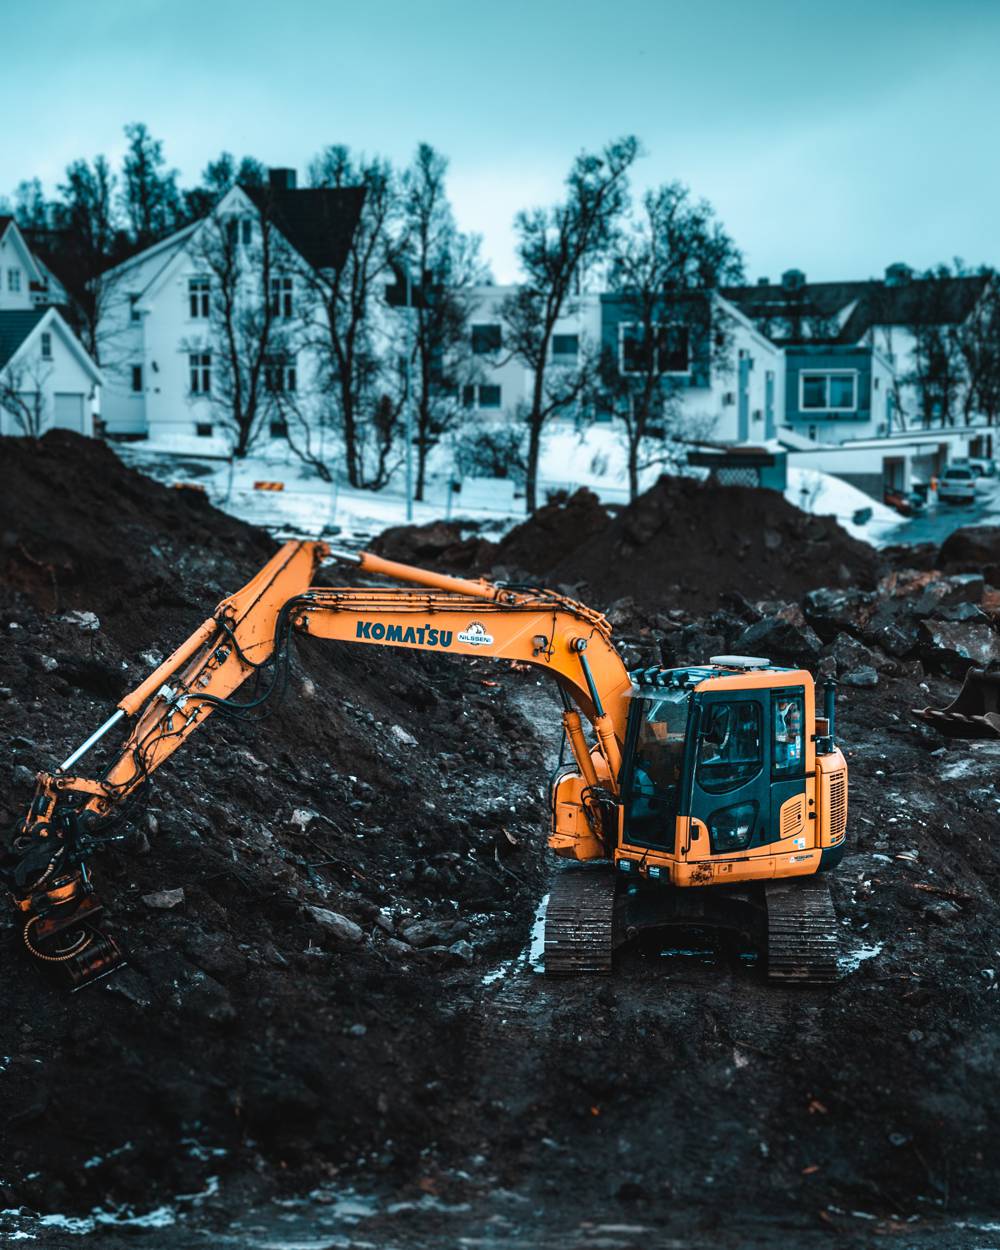 UK's safe digging resource sees over 3 million searches in 2020